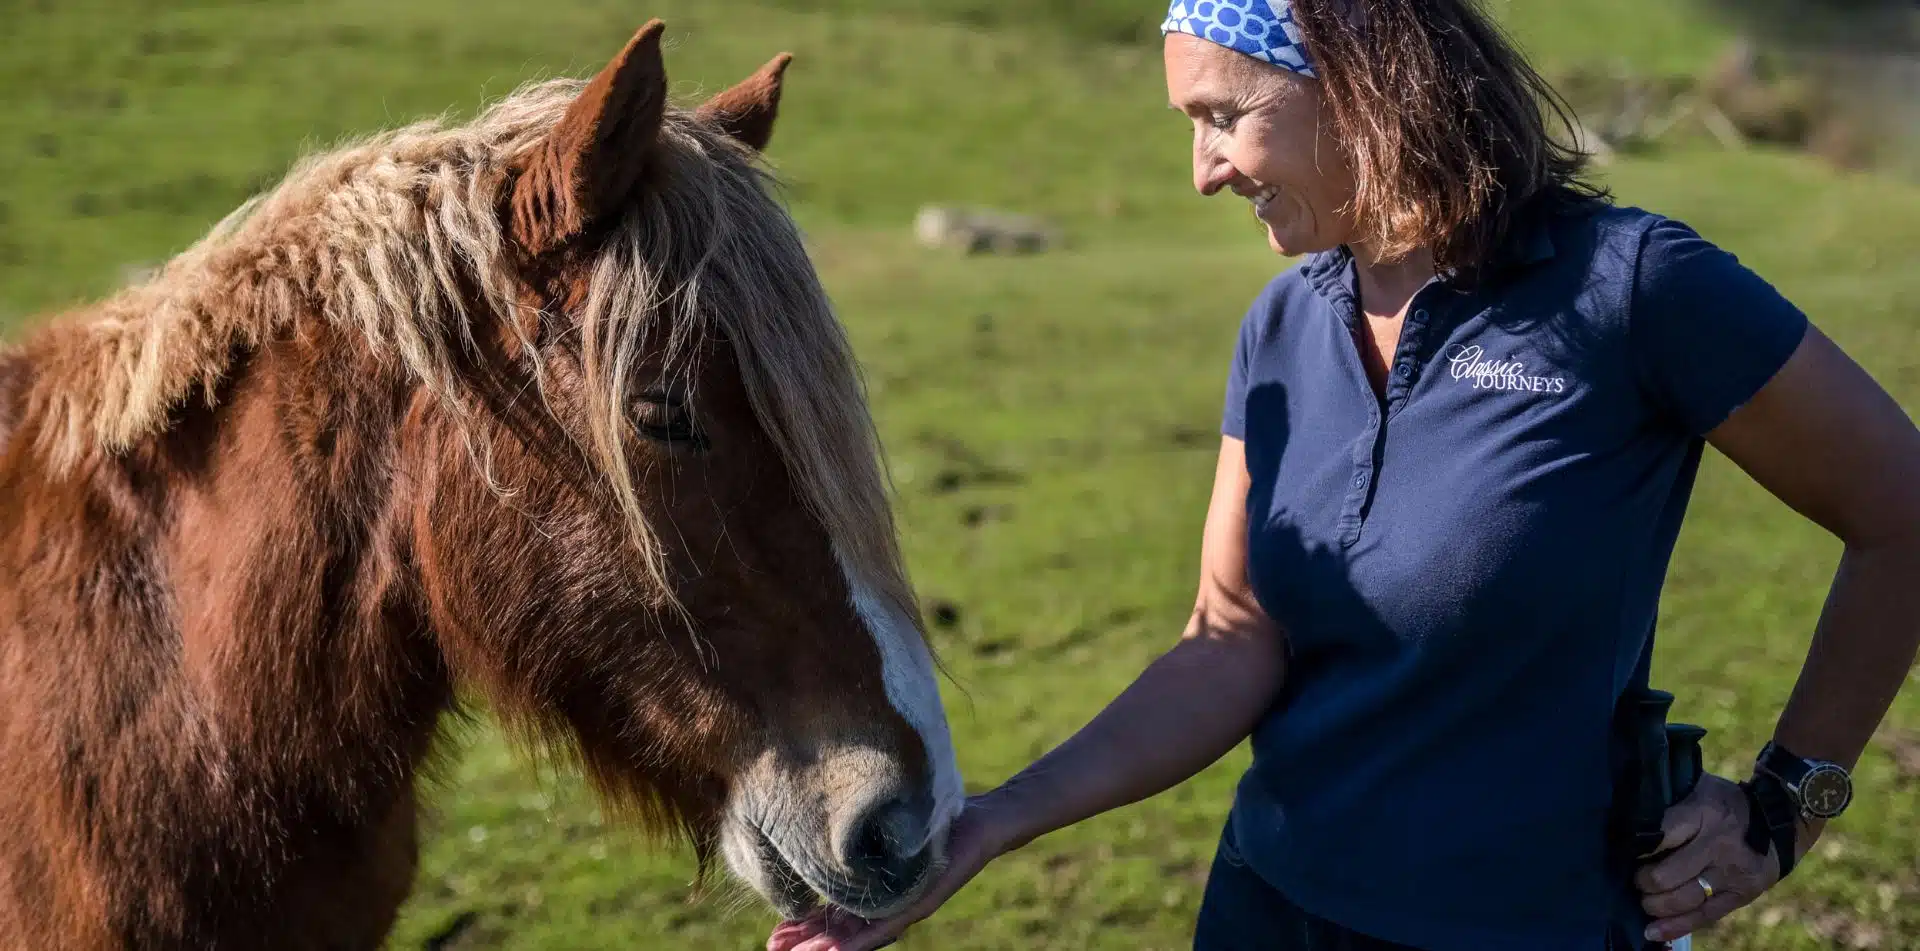 Classic Journeys' guide feeding a horse in Basque